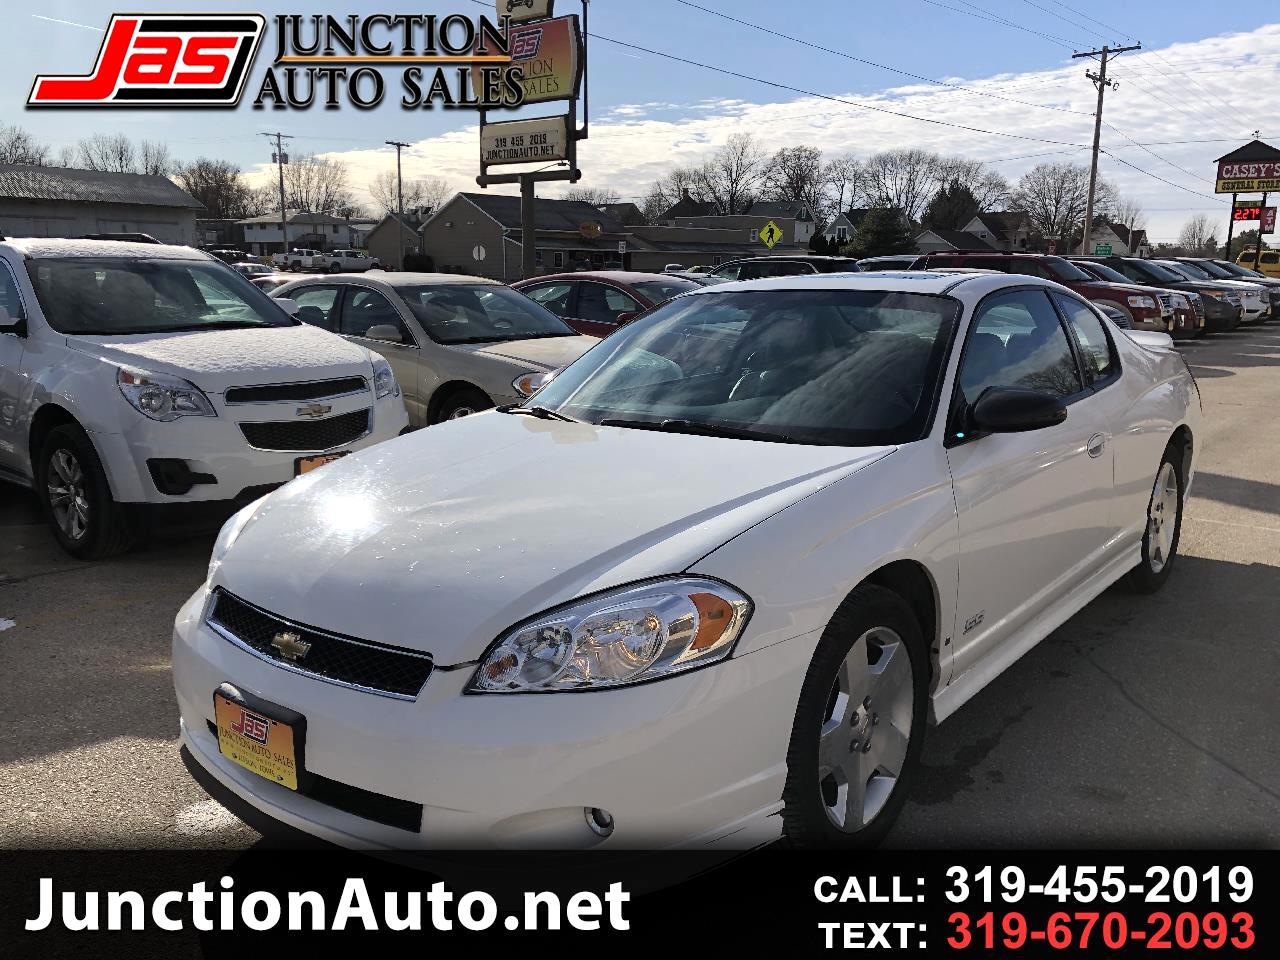 Used 2007 Chevrolet Monte Carlo Ss For Sale In Lisbon Ia